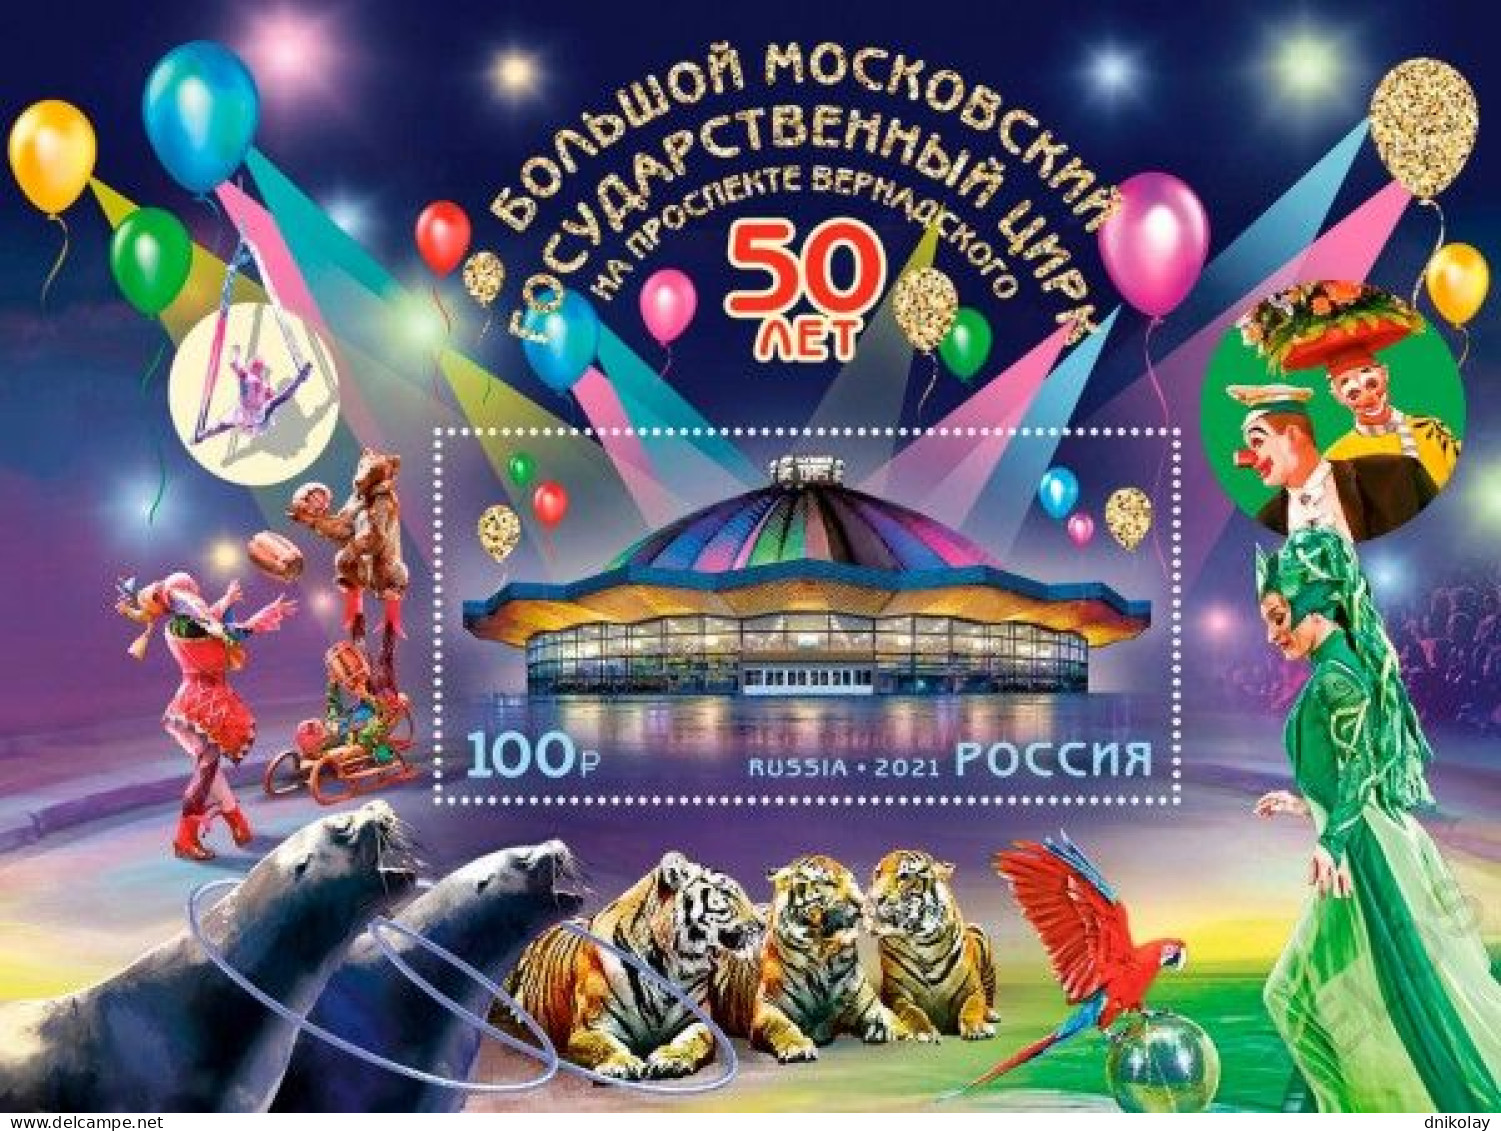 2021 3008 Russia Booklet The 50th Anniversary Of The Great Moscow State Circus On Vernadsky Avenue MNH - Nuovi